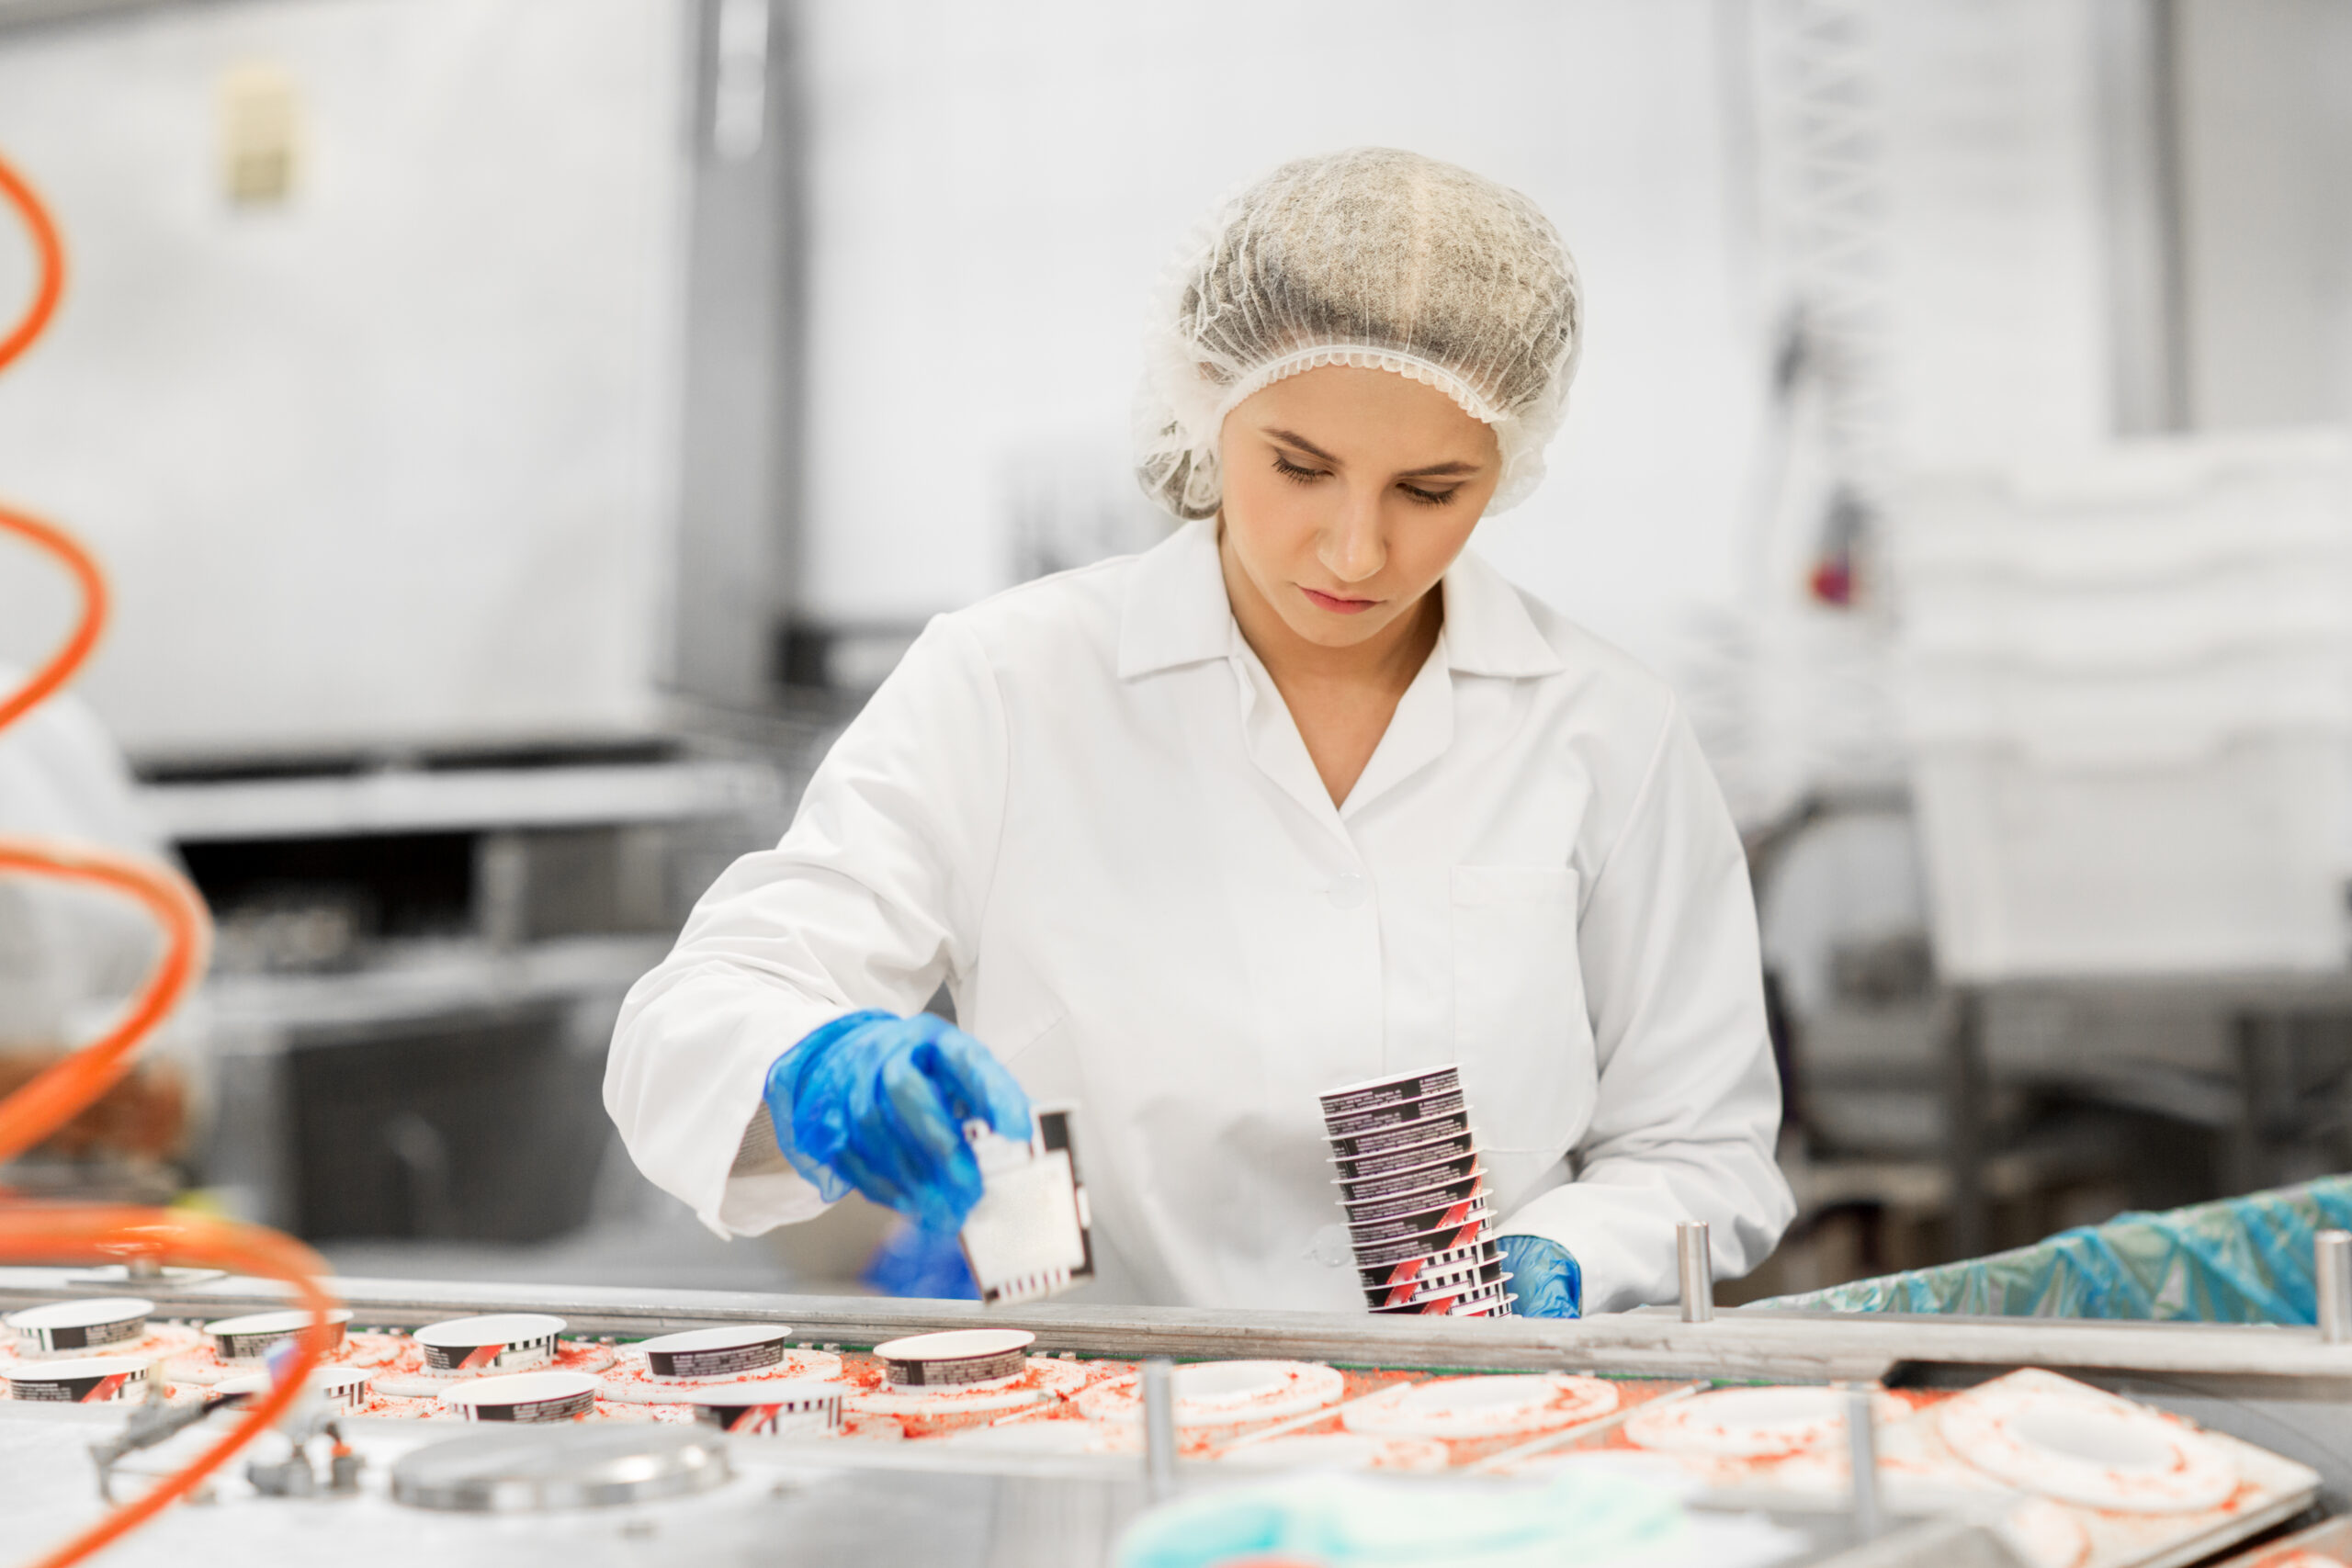 Food and Beverage Inventory Management: How to take control